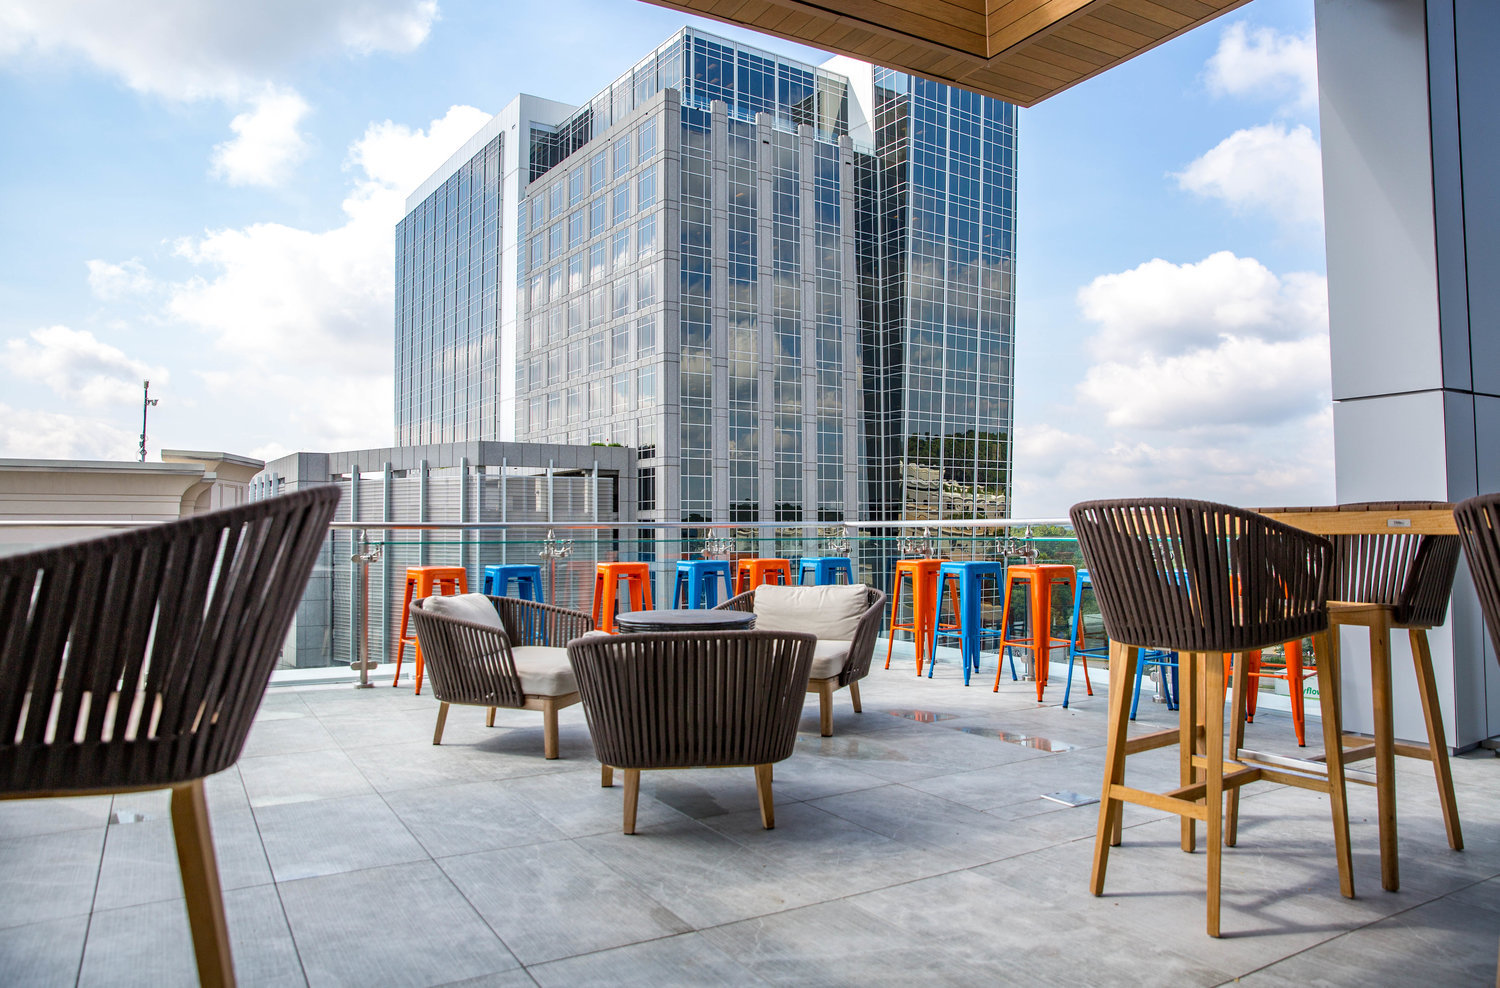 Photo of Level 7 Rooftop Bar, Raleigh, NC